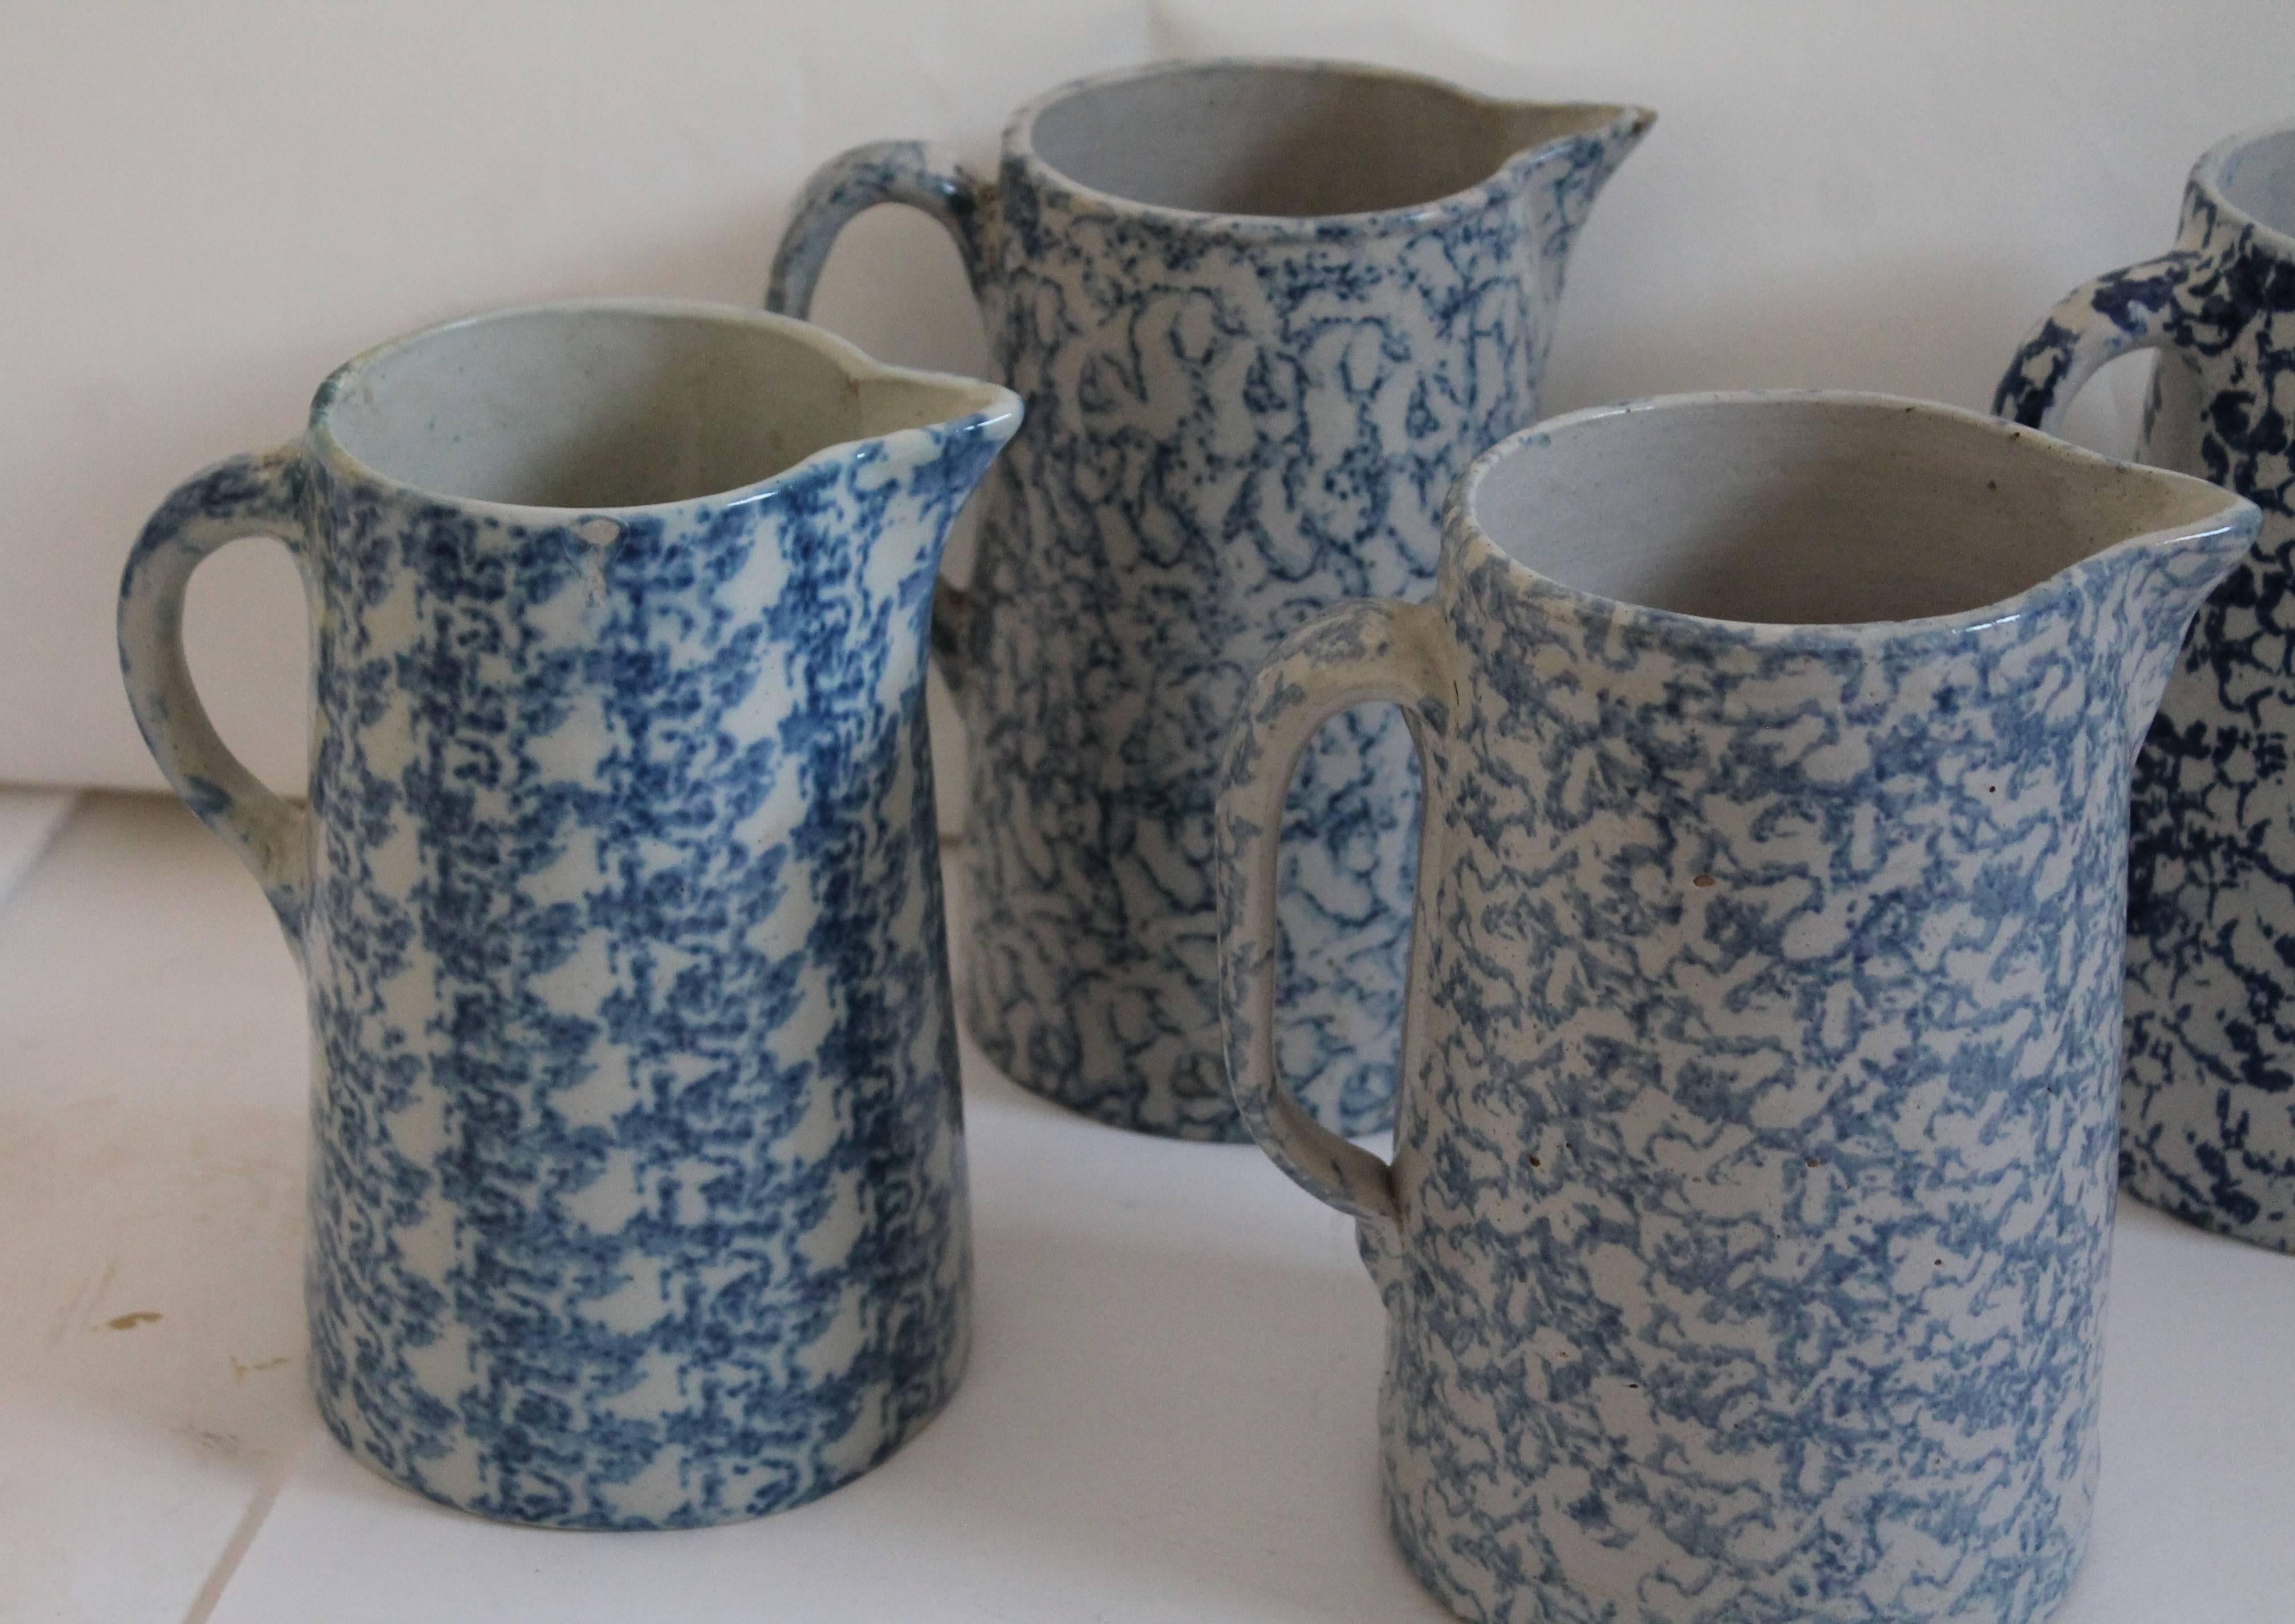 This collection of 19th century spongeware pottery. These blue and white patterned stone ware pitchers are in good condition with minor chip on lip and base of one. No cracks or other damages. Great collection.